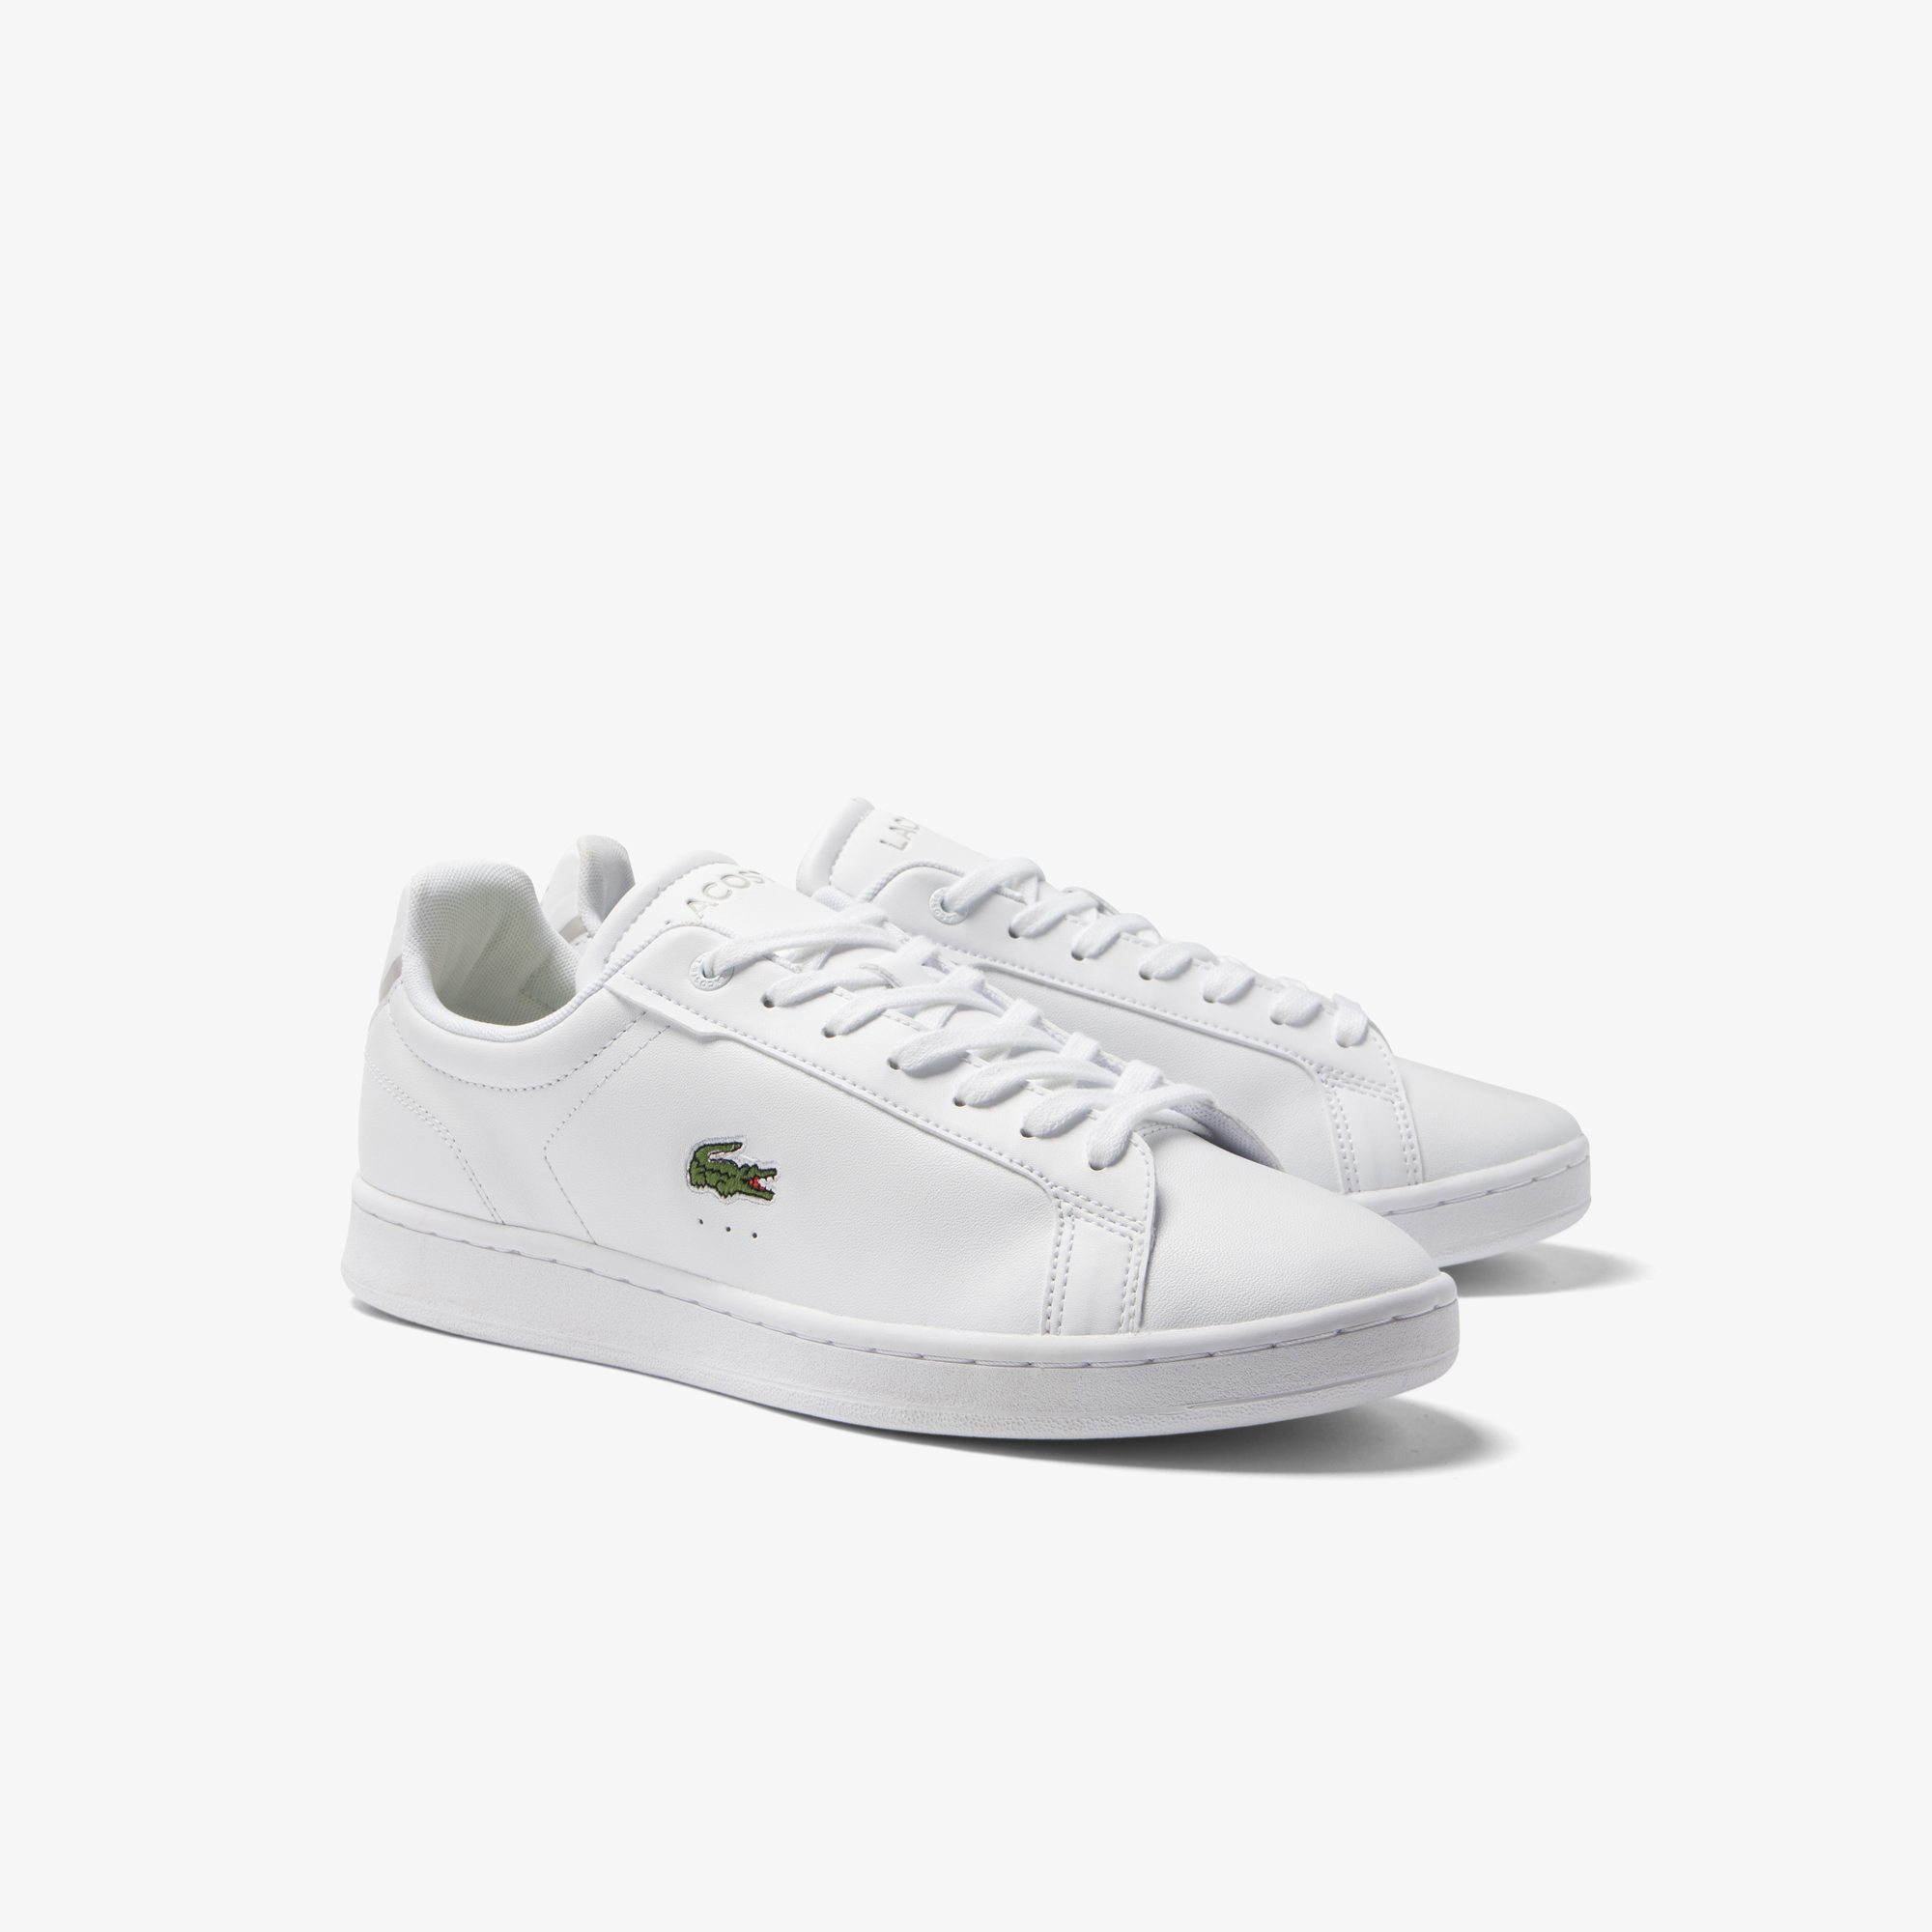 LACOSTE Carnaby Bl21 1 Sma Heren